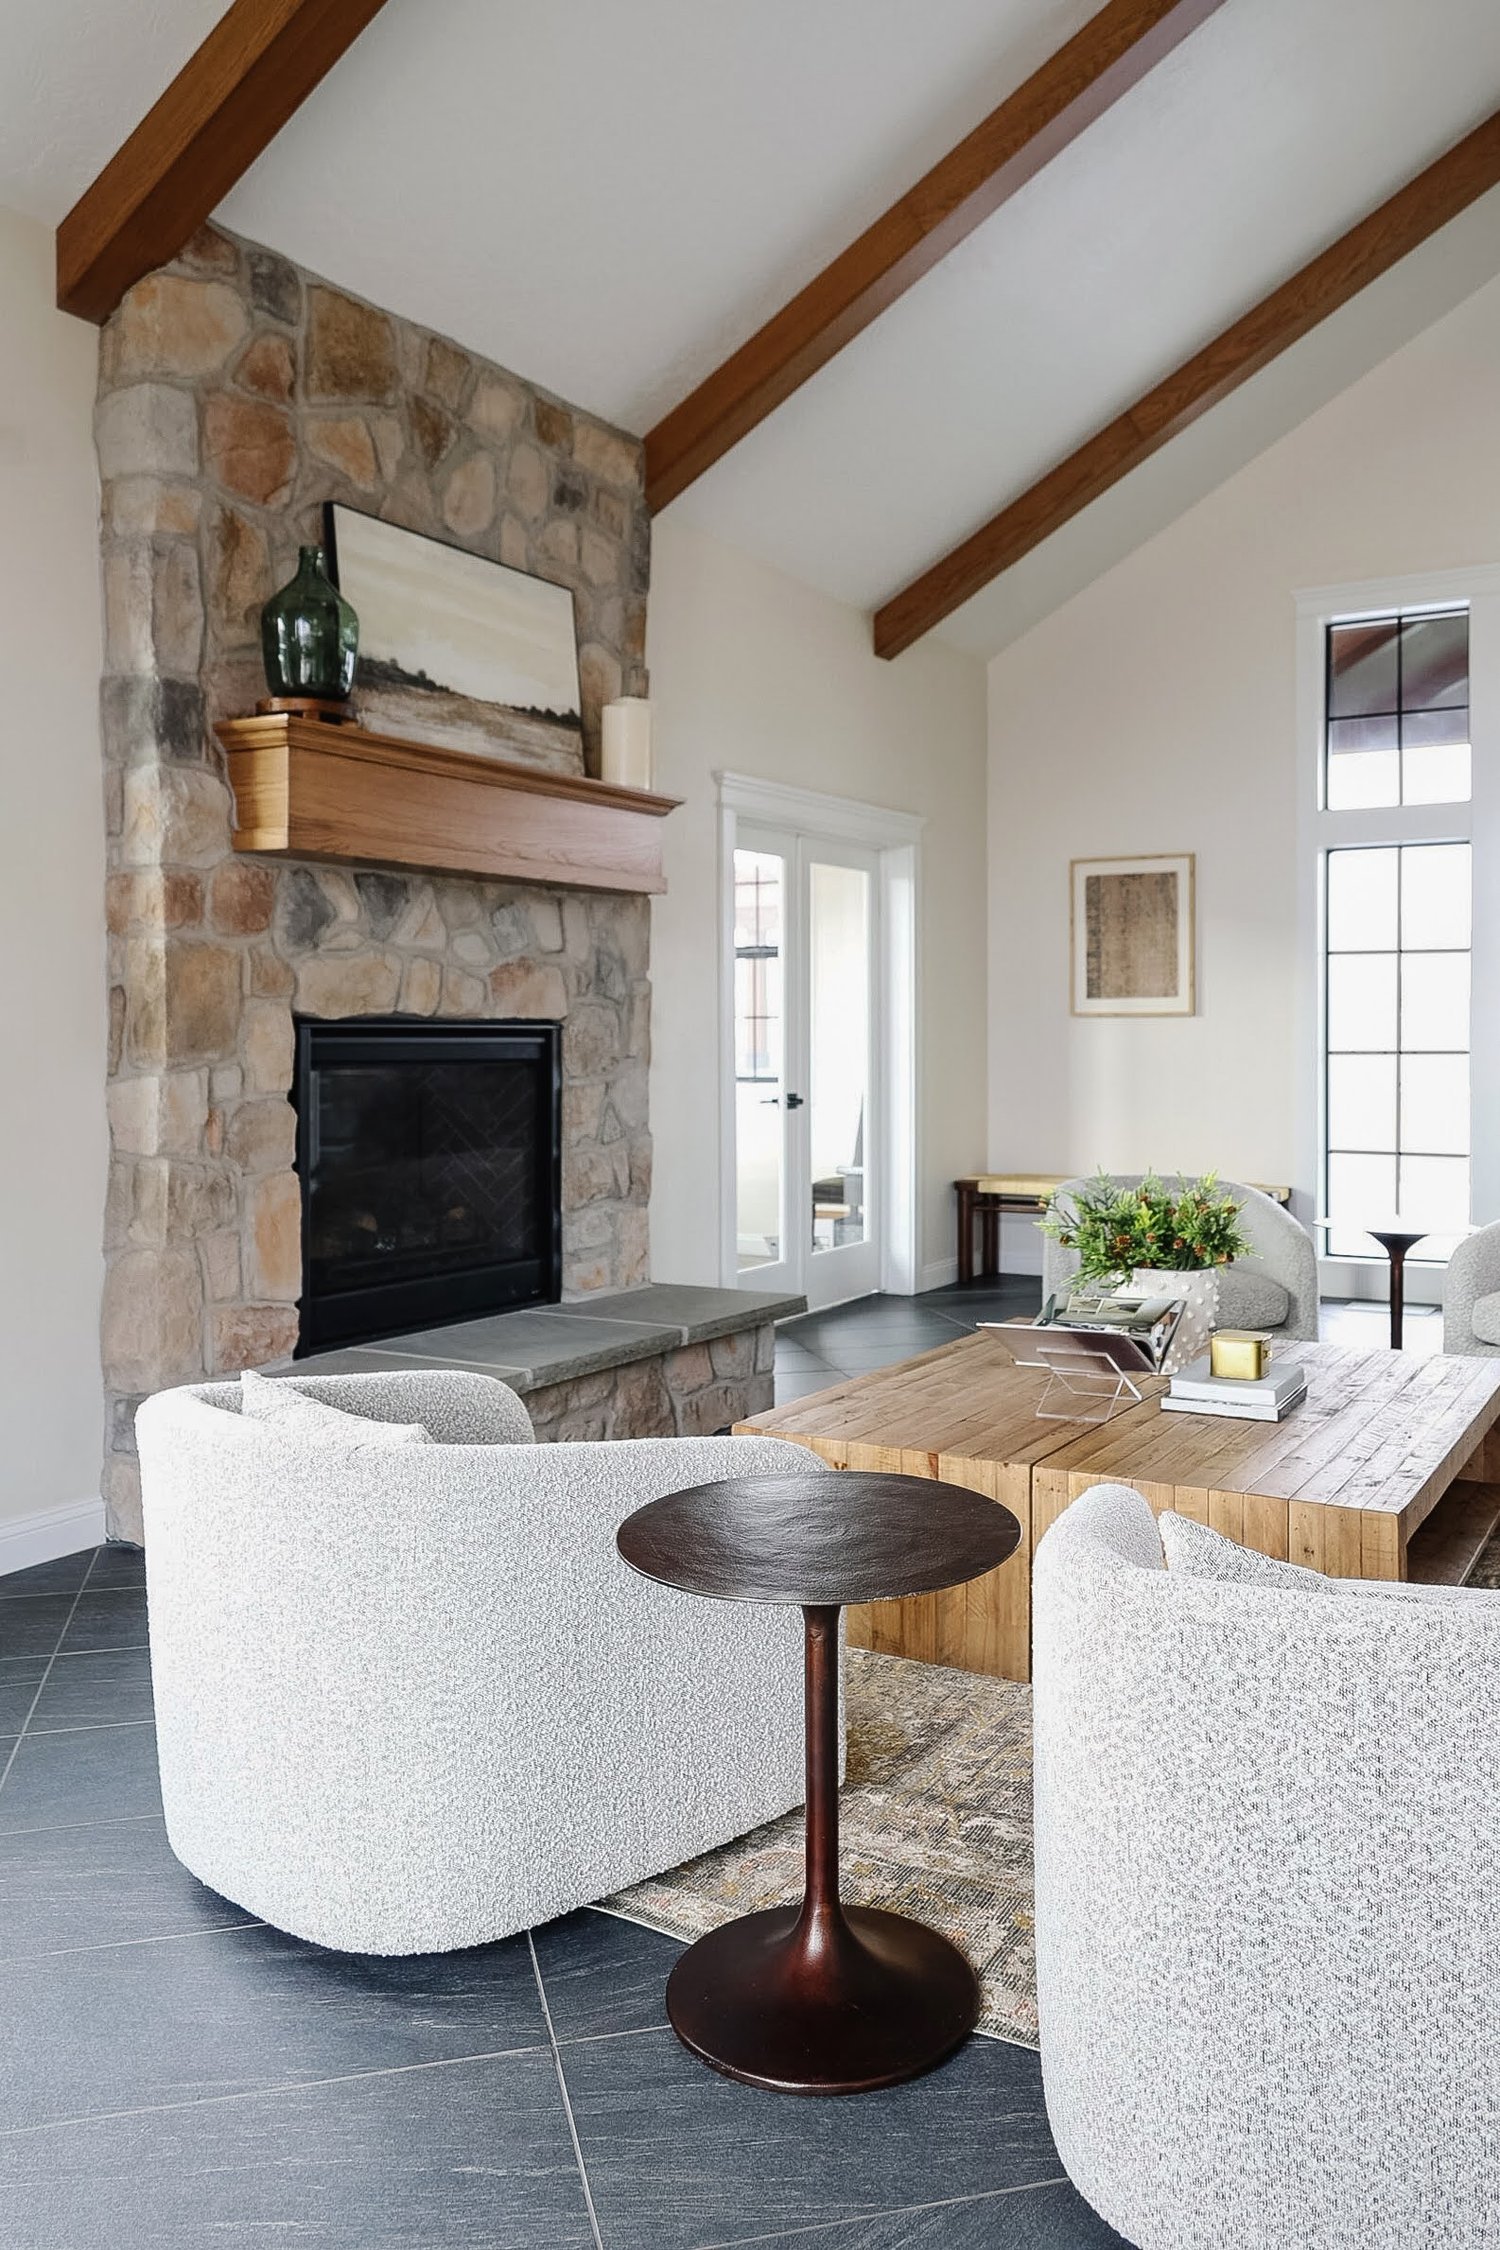  The Liz Powell design team will work hard to make sure the hundreds of decisions you have to make during the home design process are easy and fun. #LizPowellDesign #InteriorDesignUtah #CacheValleyNewBuilds #floorplans #FullServiceDesign #CustomDesig